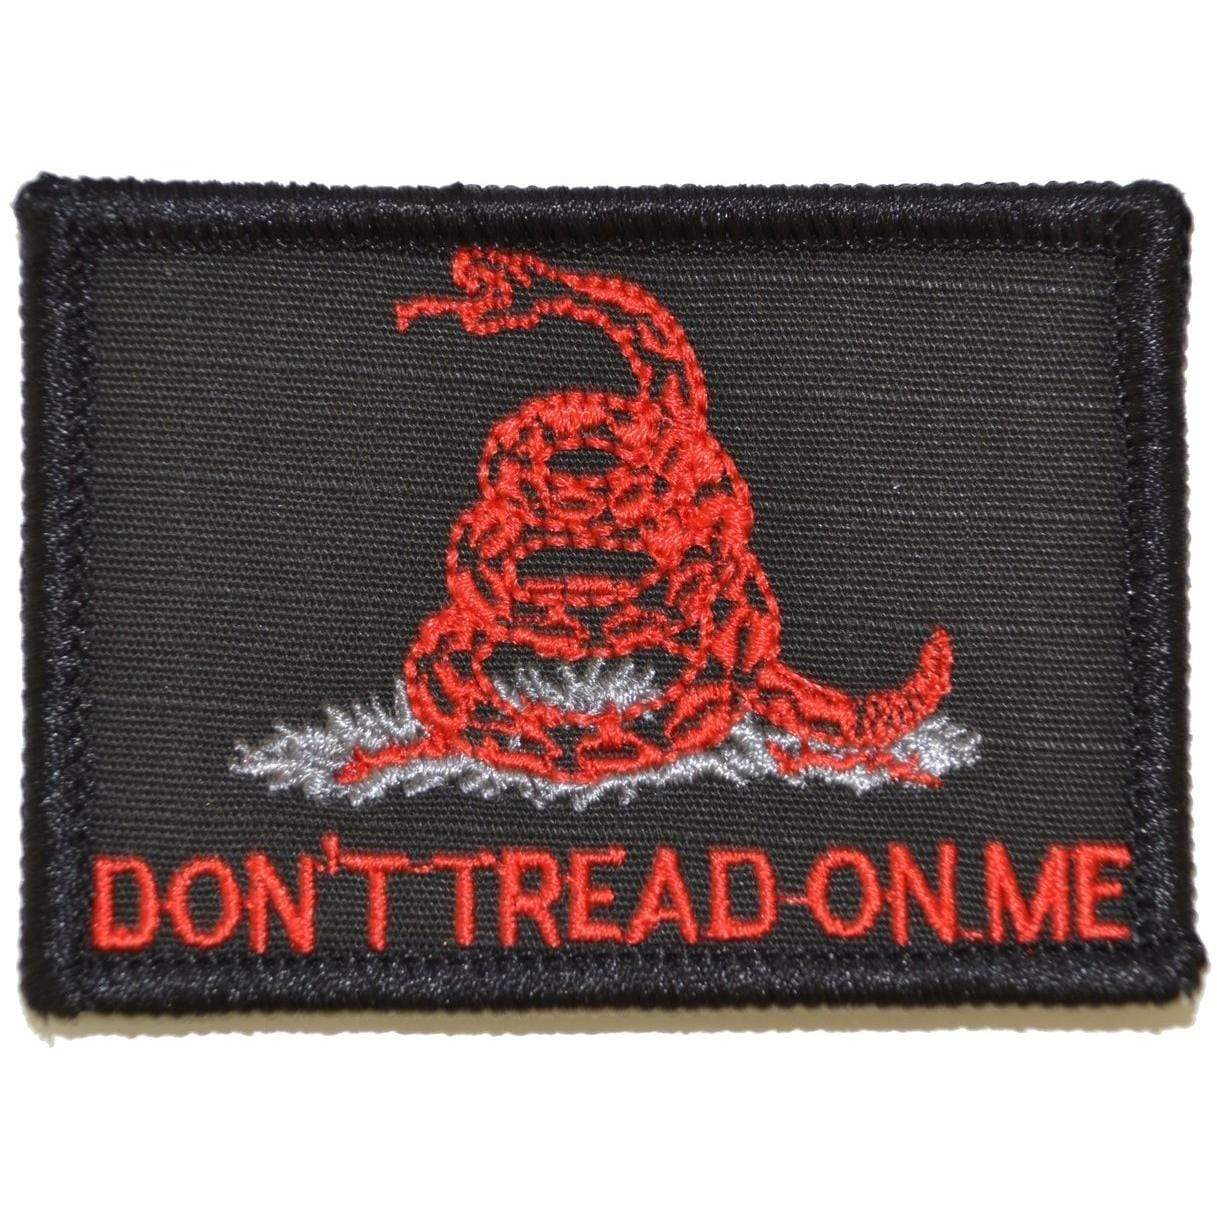 Tactical Gear Junkie Patches Black w/ Red Don't Tread on Me Gadsden Snake - 2x3 Patch